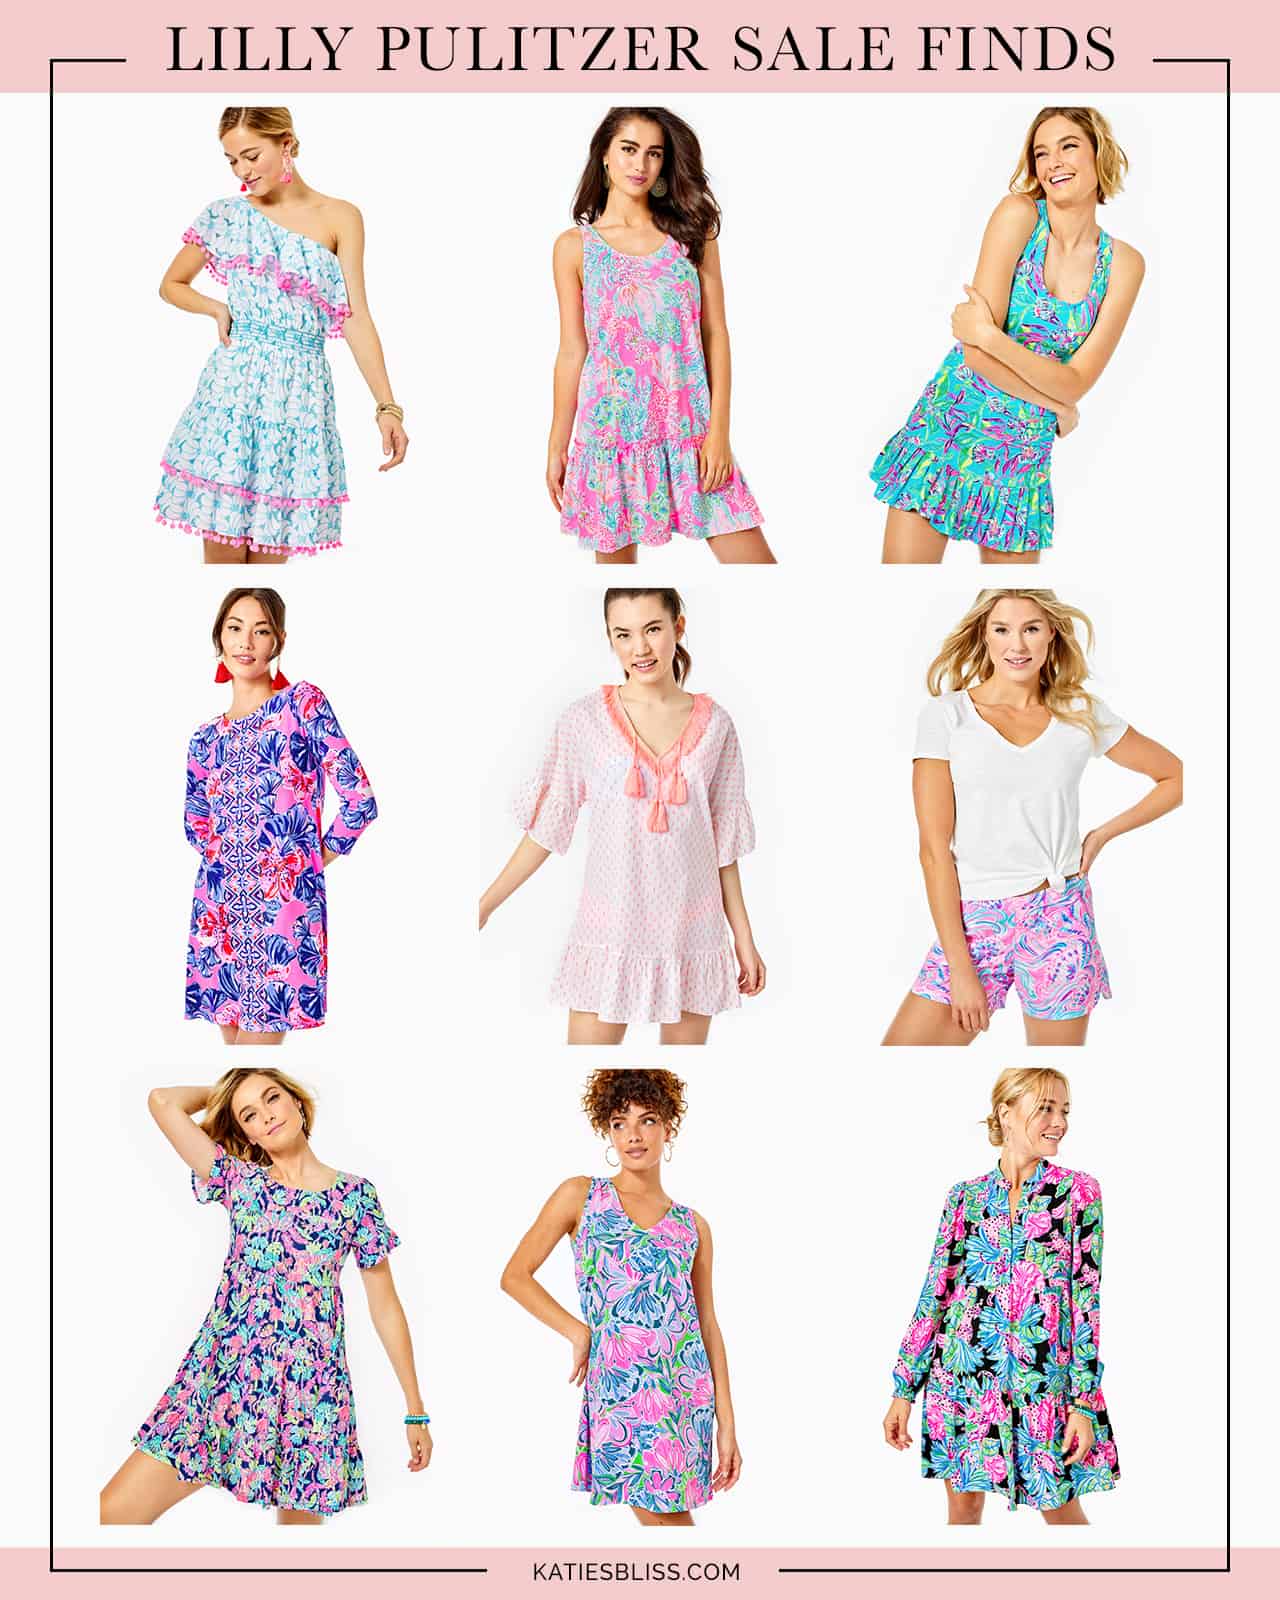 Katies Bliss Lilly Pulitzer Sale Finds